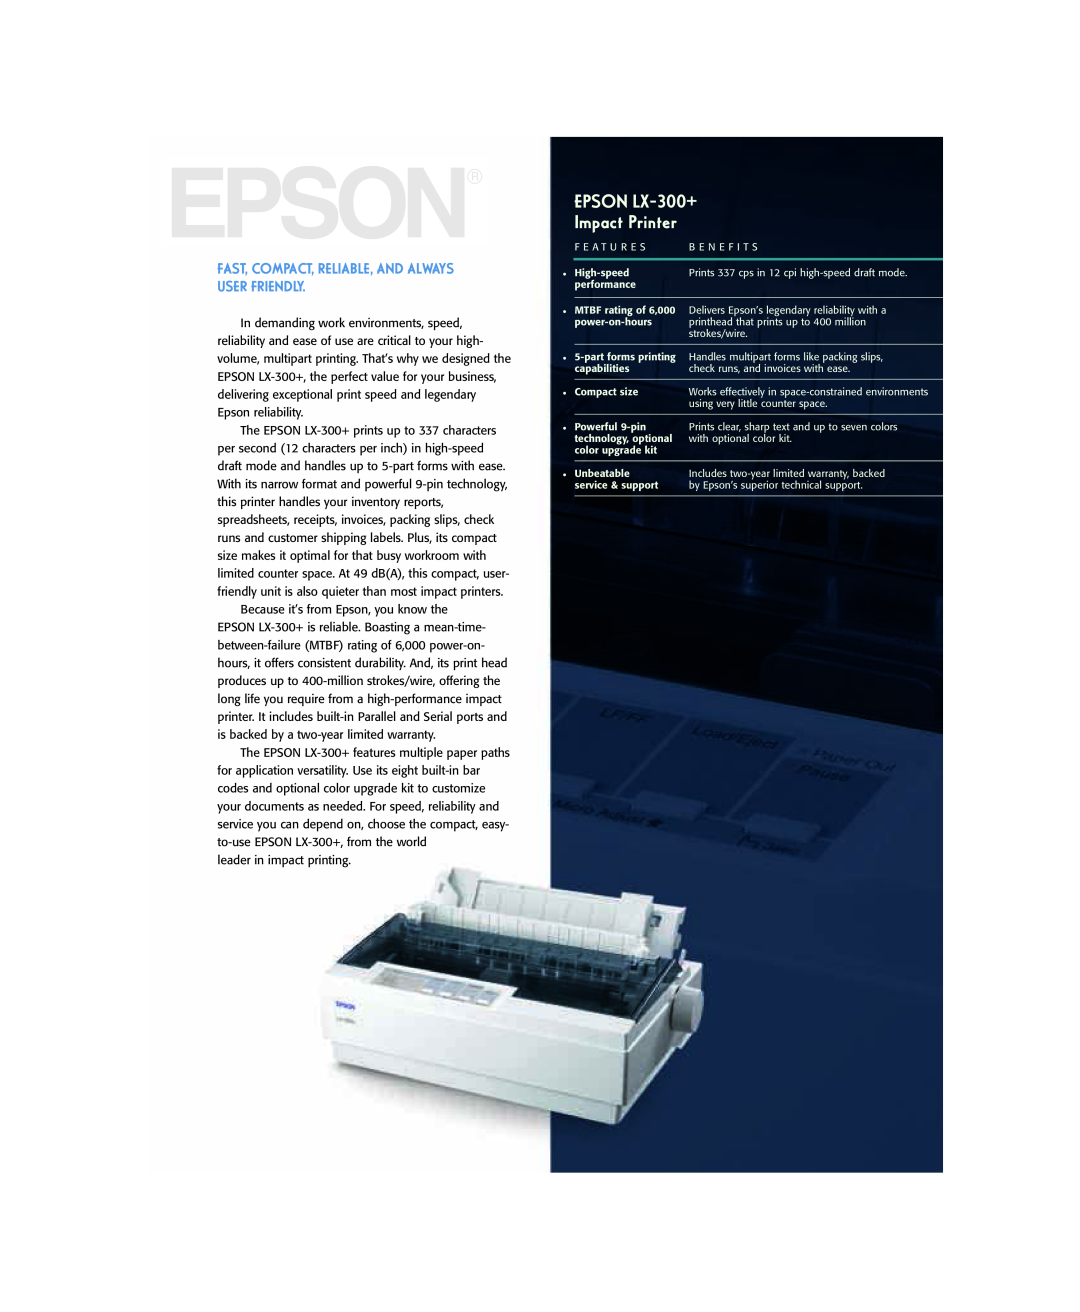 Epson warranty EPSON LX-300+ Impact Printer, Fast, Compact, Reliable, And Always User Friendly 